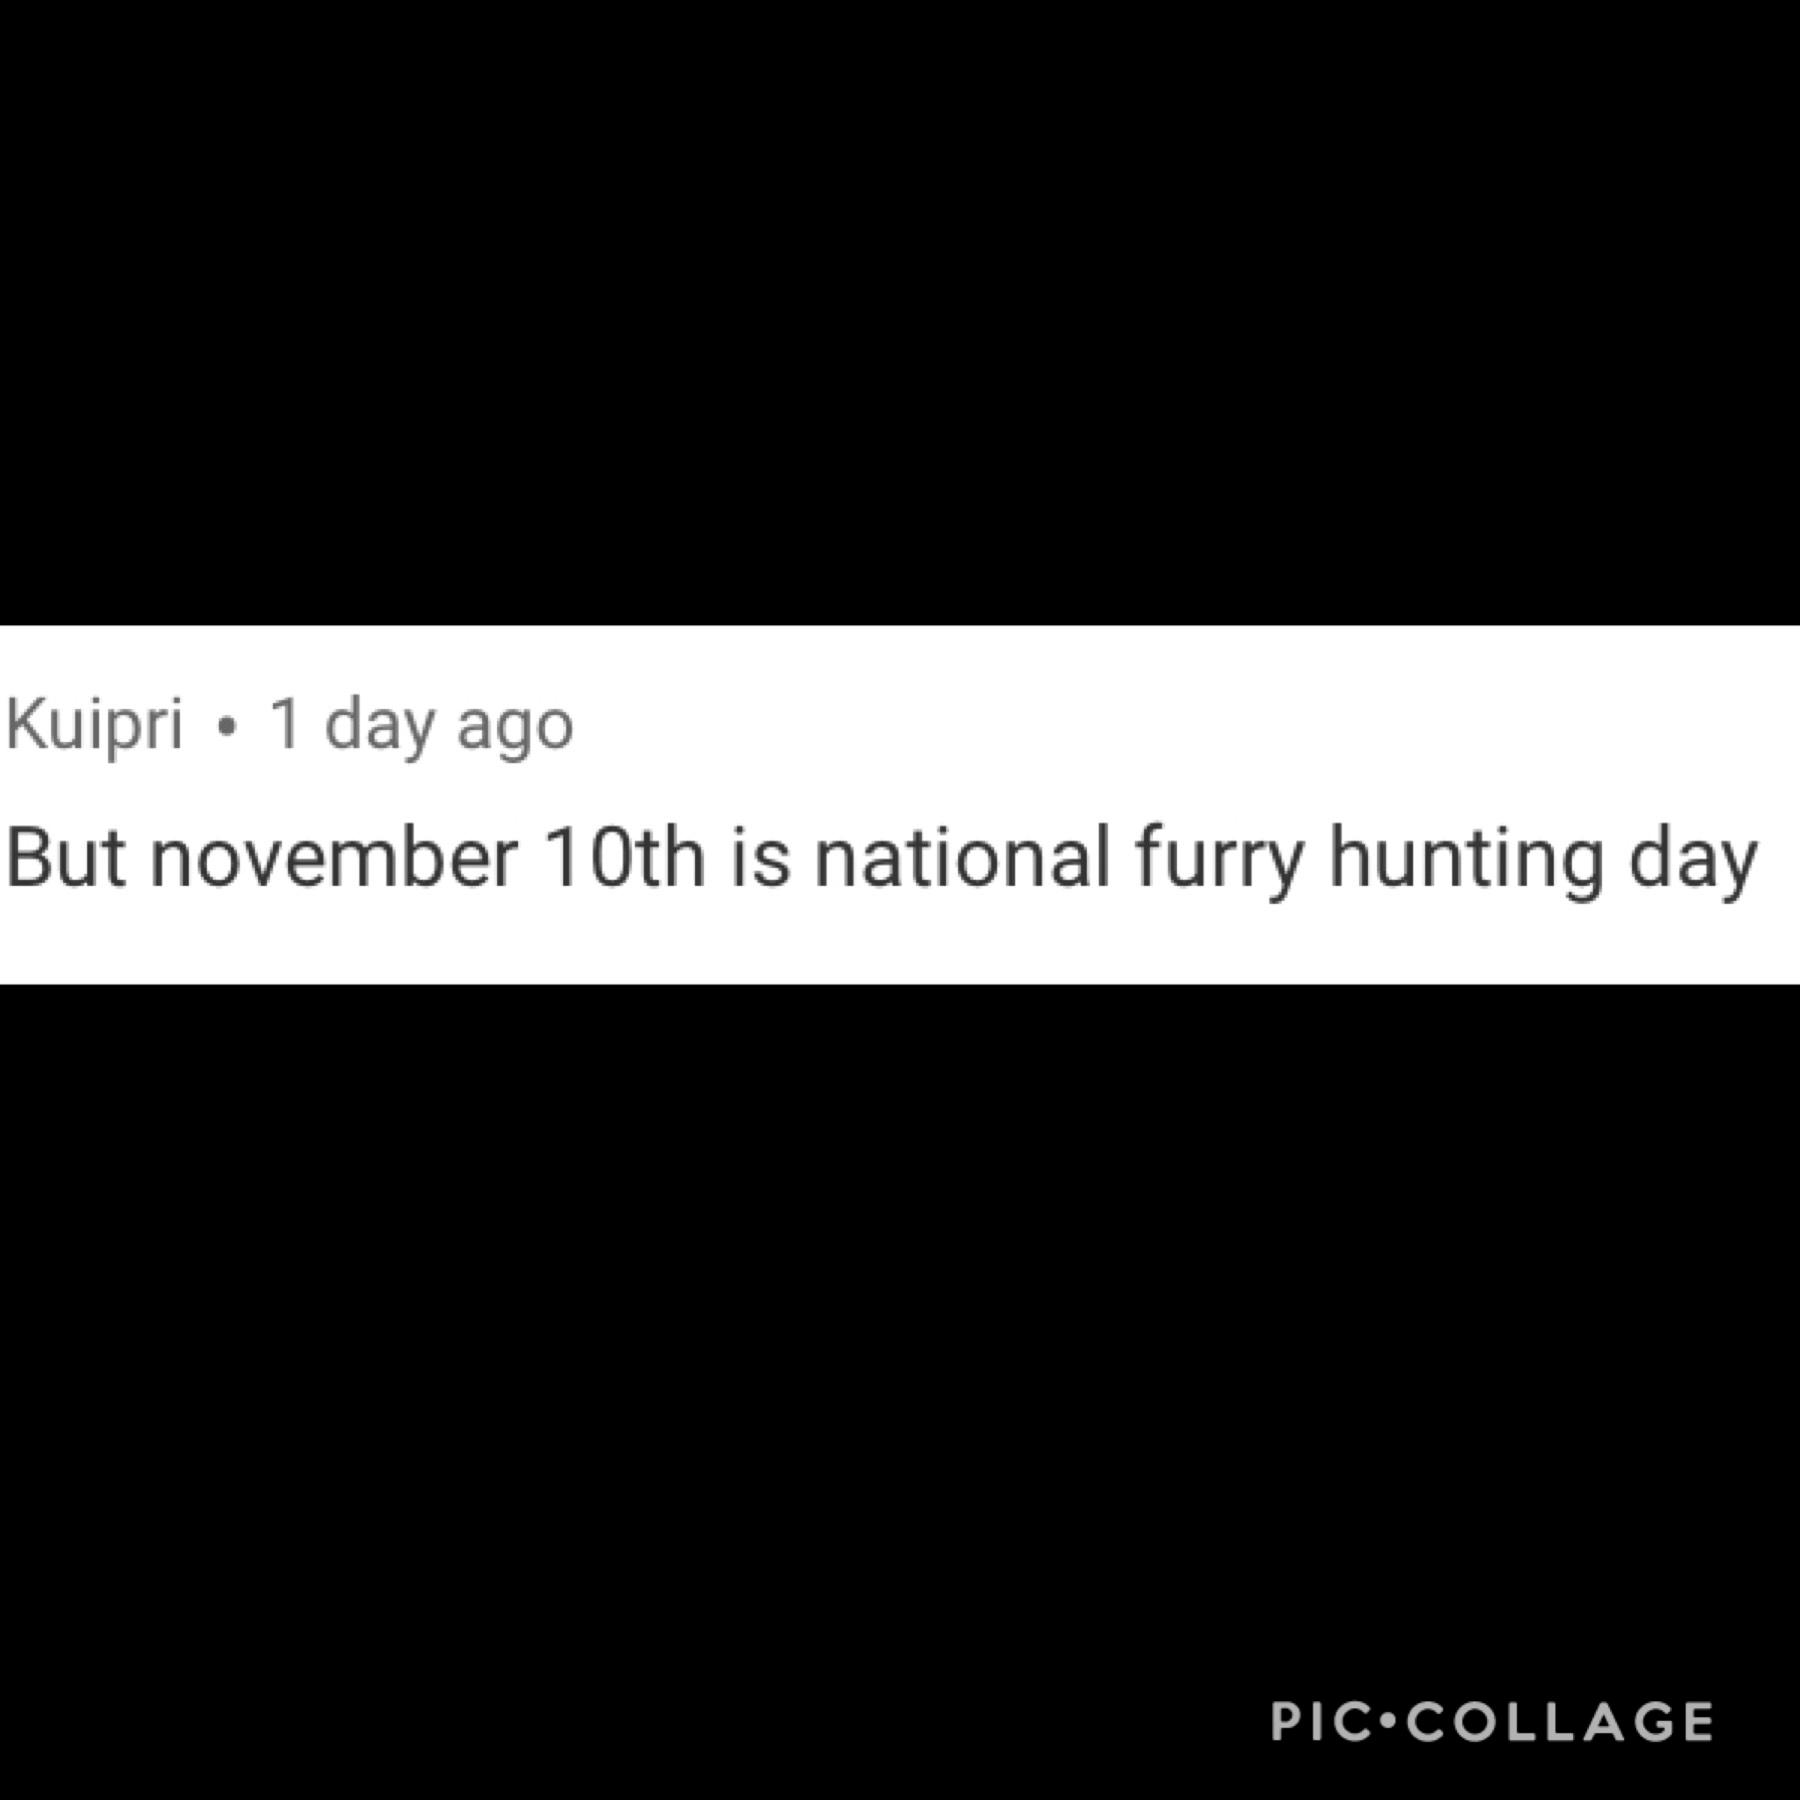 *Man, I can’t wait till National Furry Hunting day